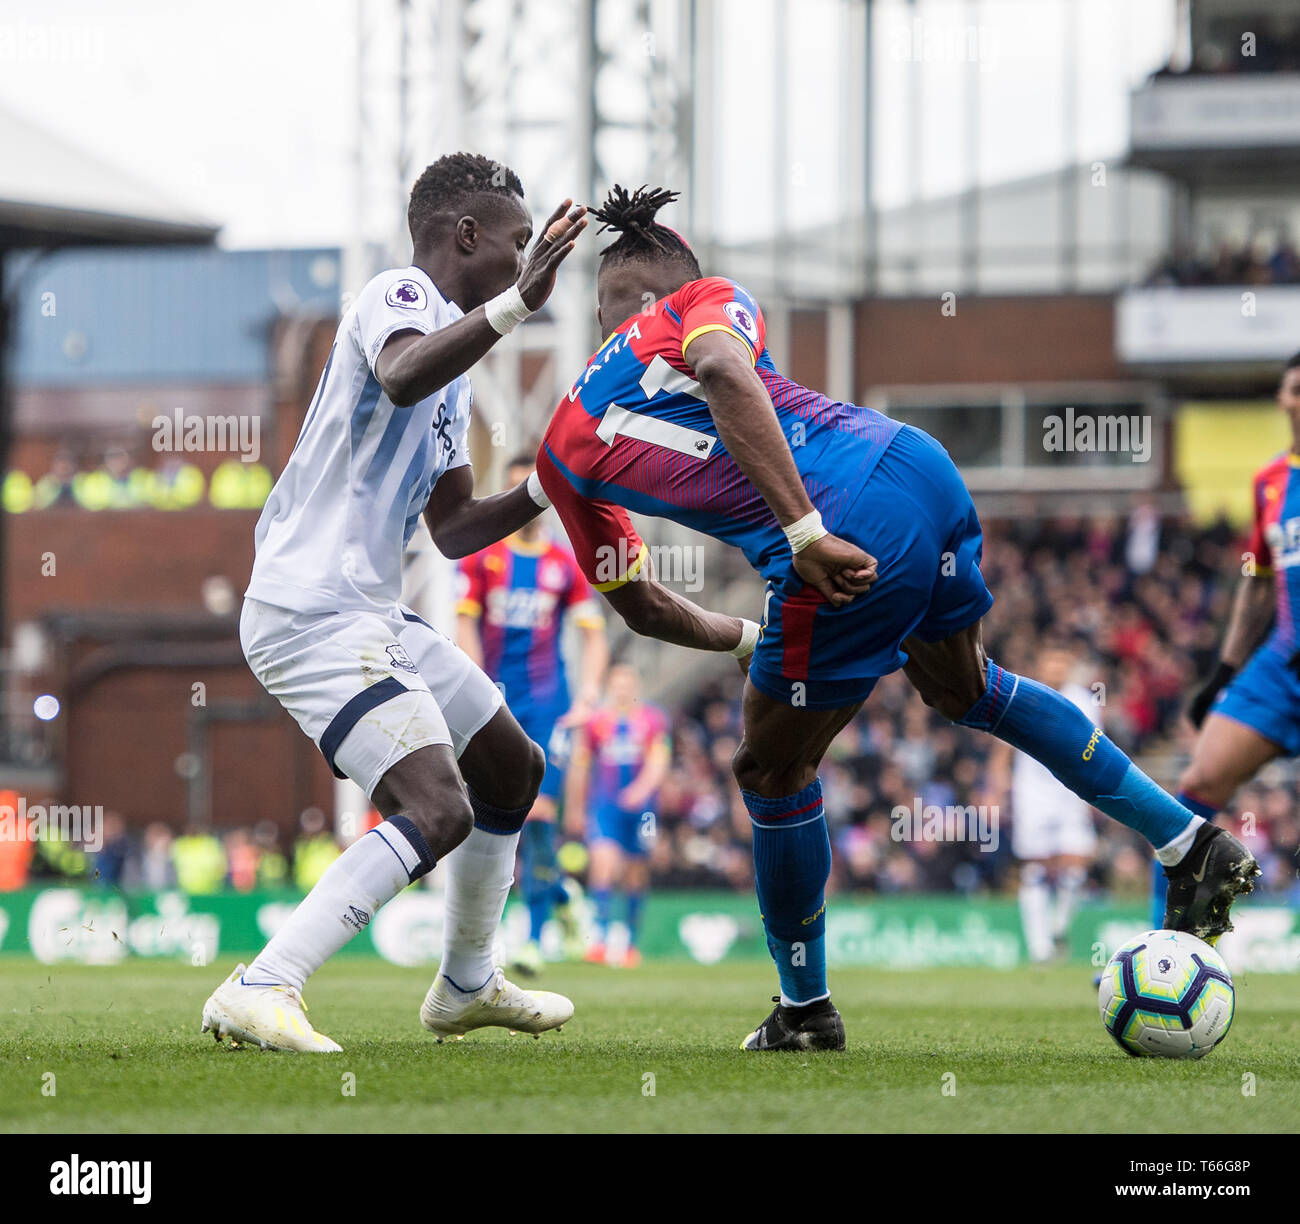 LONDON, ENGLAND - APRIL 27: Wilfried Zaha of Crystal Palace and Idrissa Gueye of Everton FC during the Premier League match between Crystal Palace and Everton FC at Selhurst Park on April 27, 2019 in London, United Kingdom. (Photo by Sebastian Frej/MB Media) Stock Photo